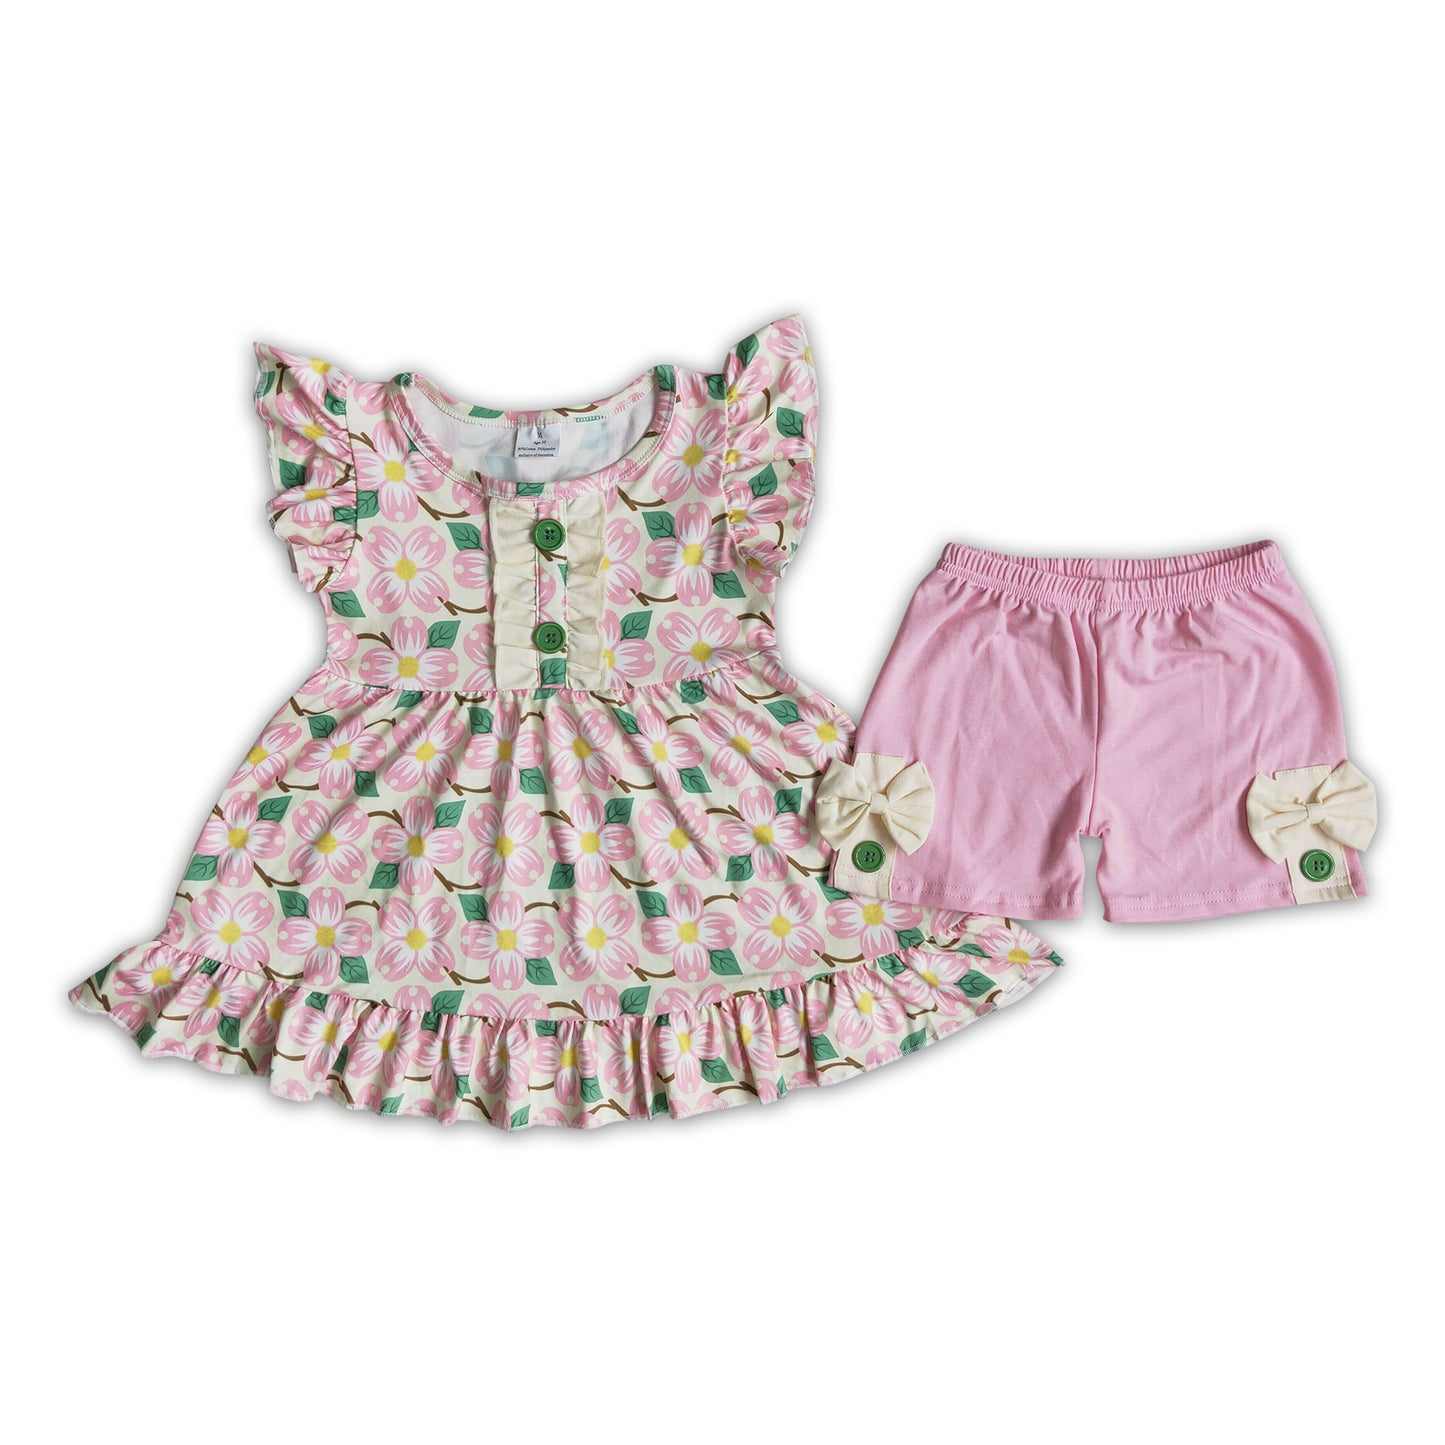 Floral tunic cotton shorts girls outfits